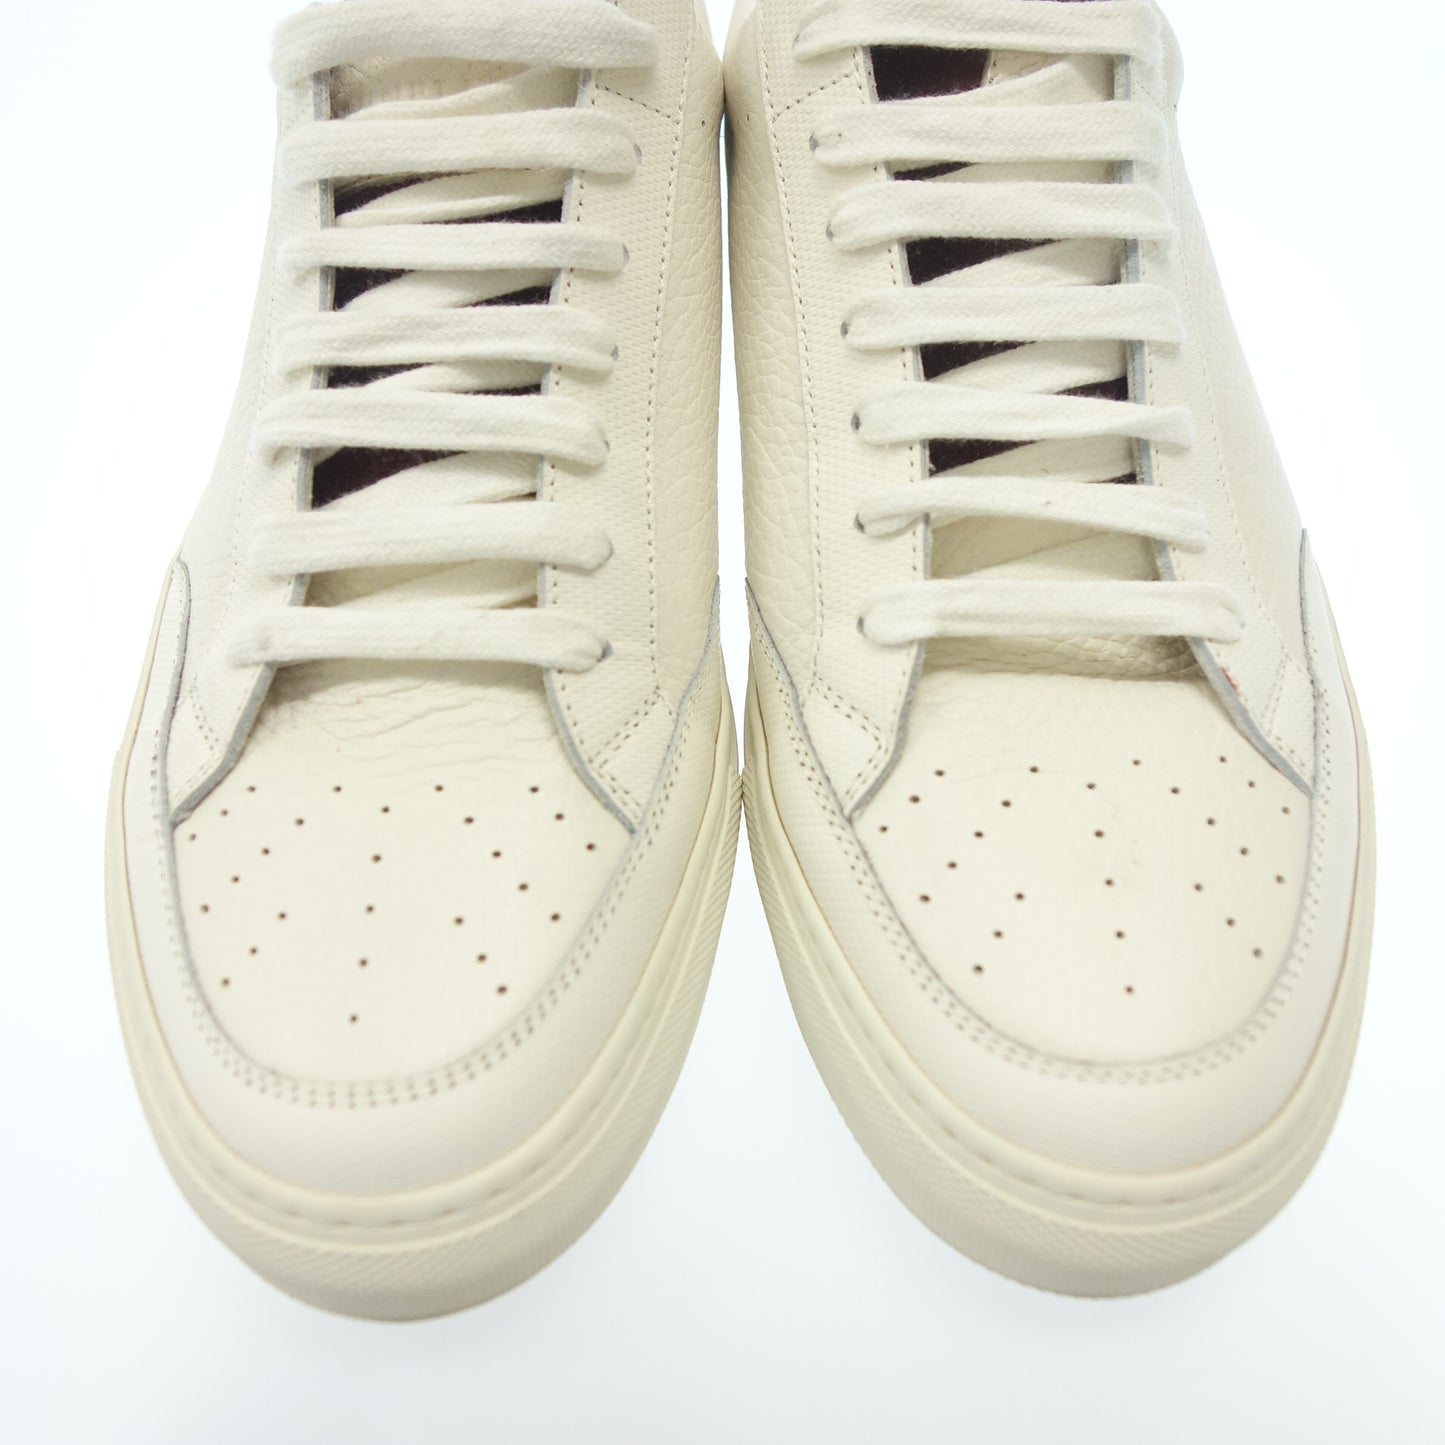 Brunello Cucinelli all leather sneakers suede switching men's white 42 BRUNELLO CUCINELLI [AFC27] [Used] 